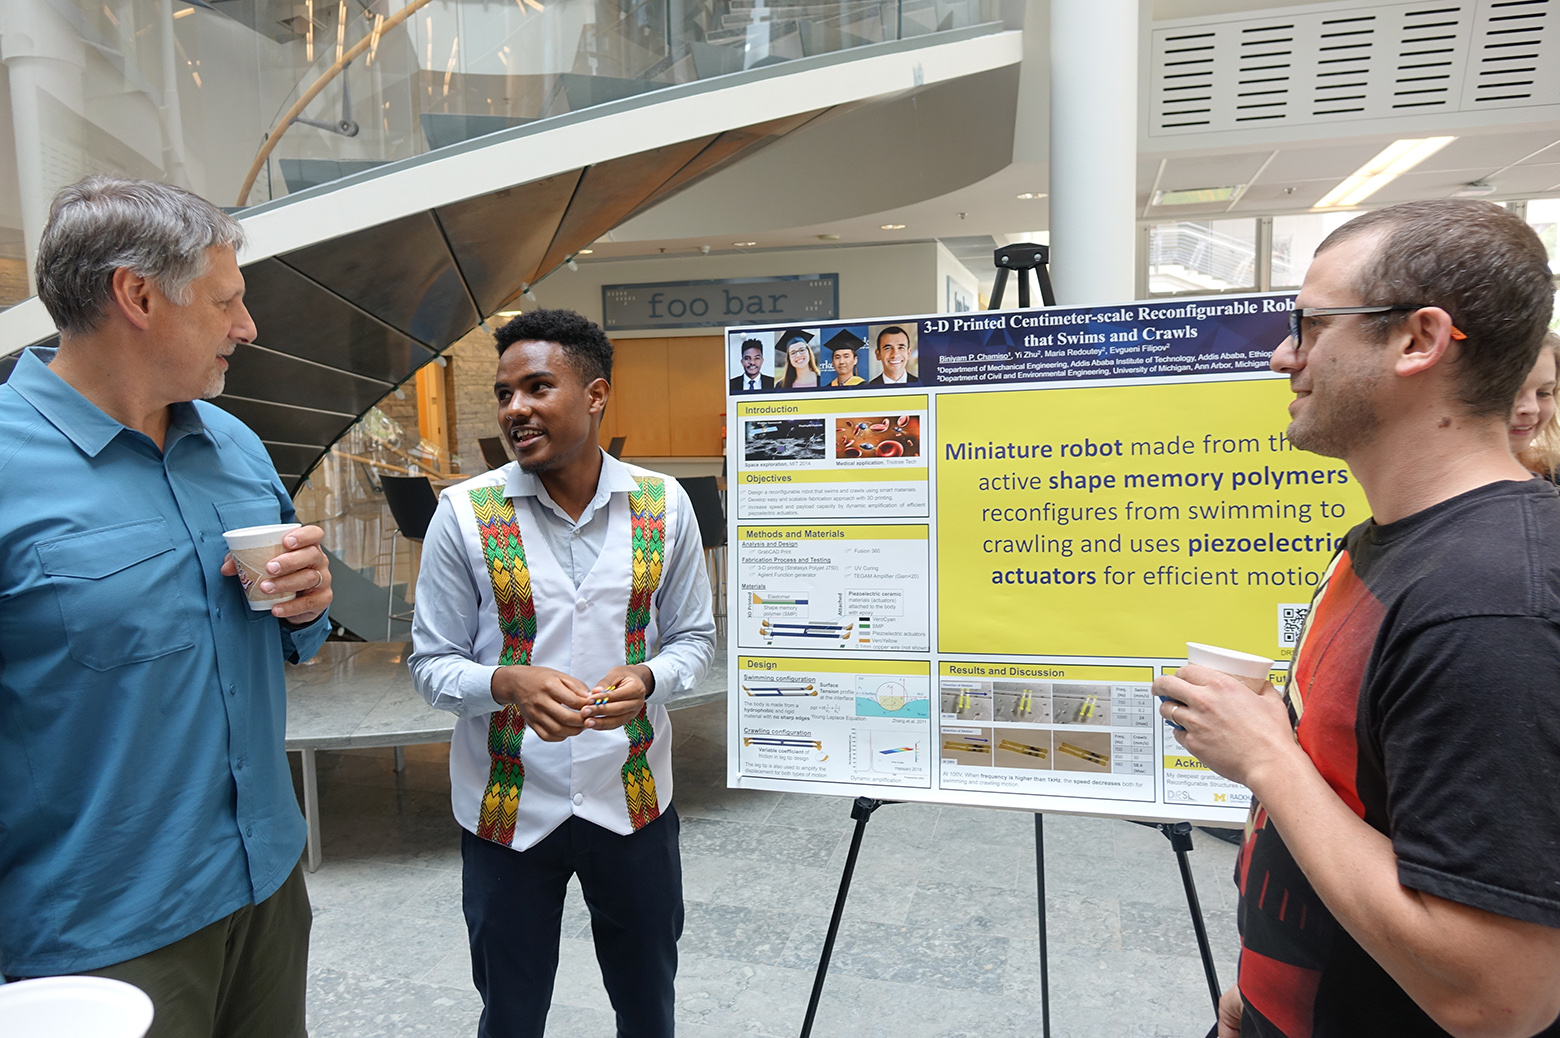 Astudent shows a poster to two faculty